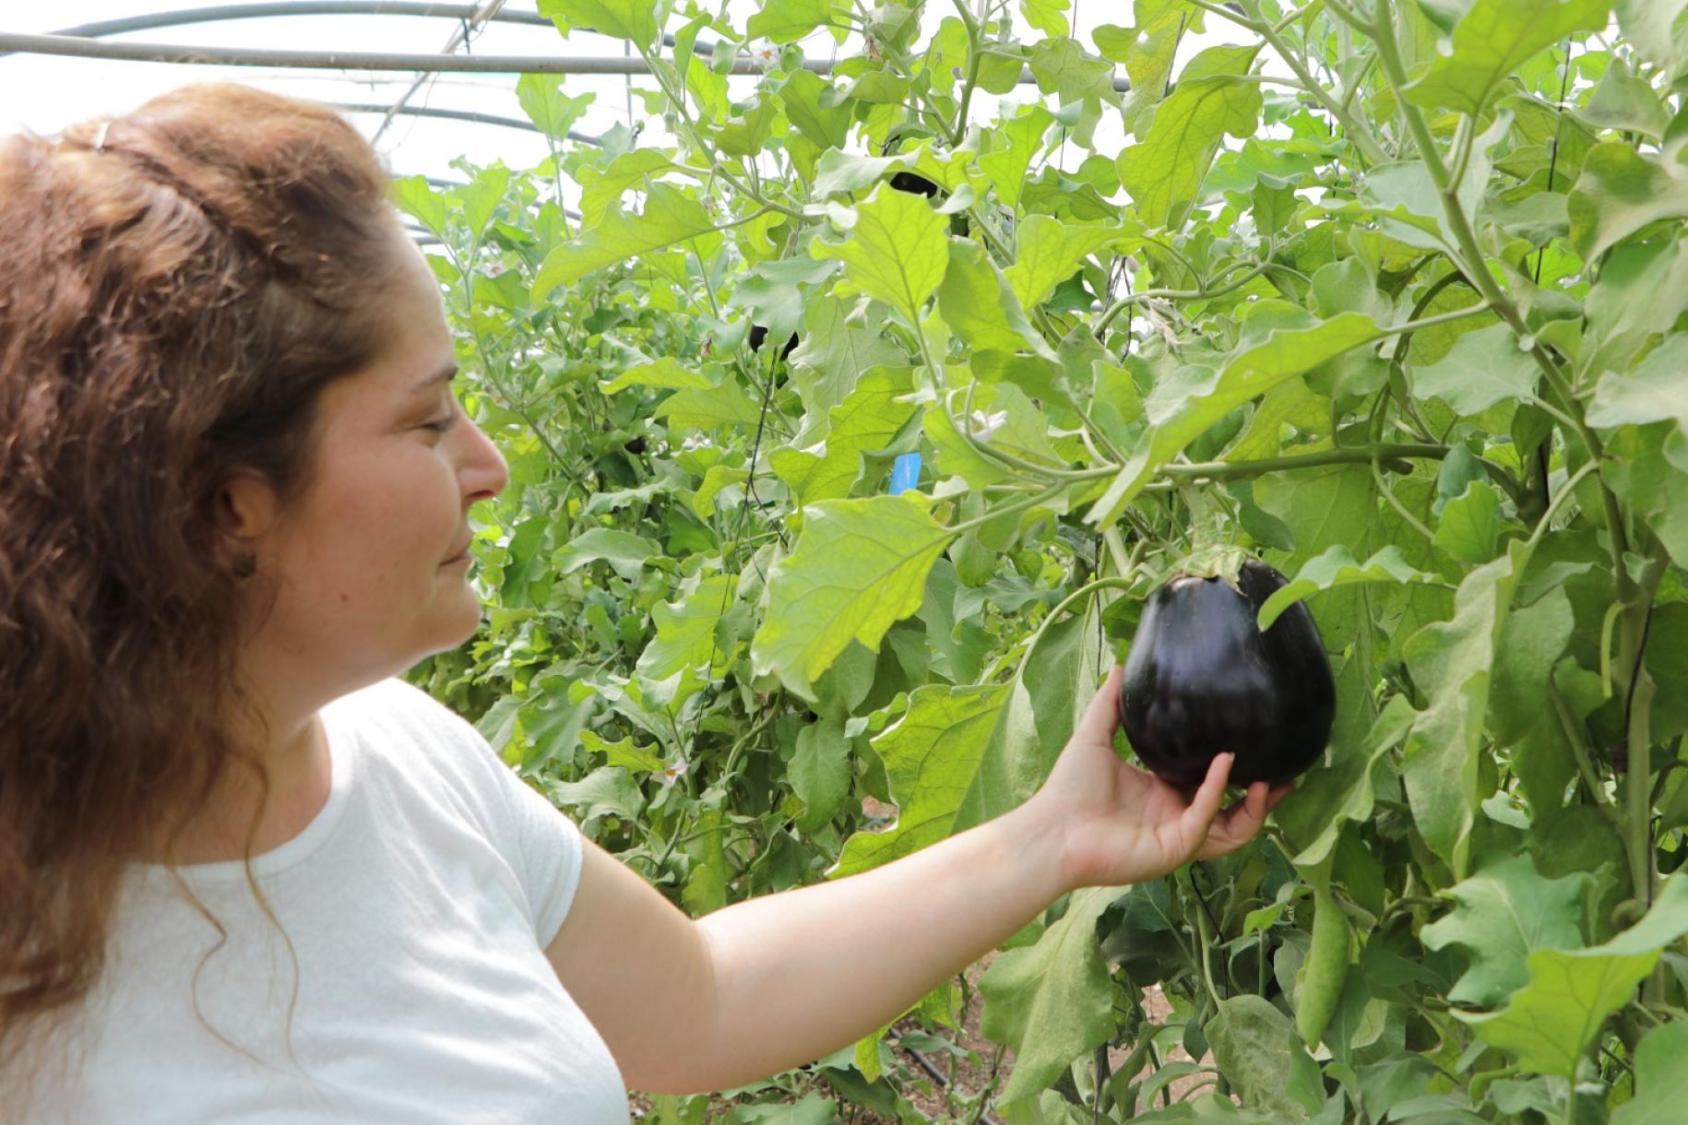 A woman in a white shirt holds a dark purple eggplant growing on green vines.